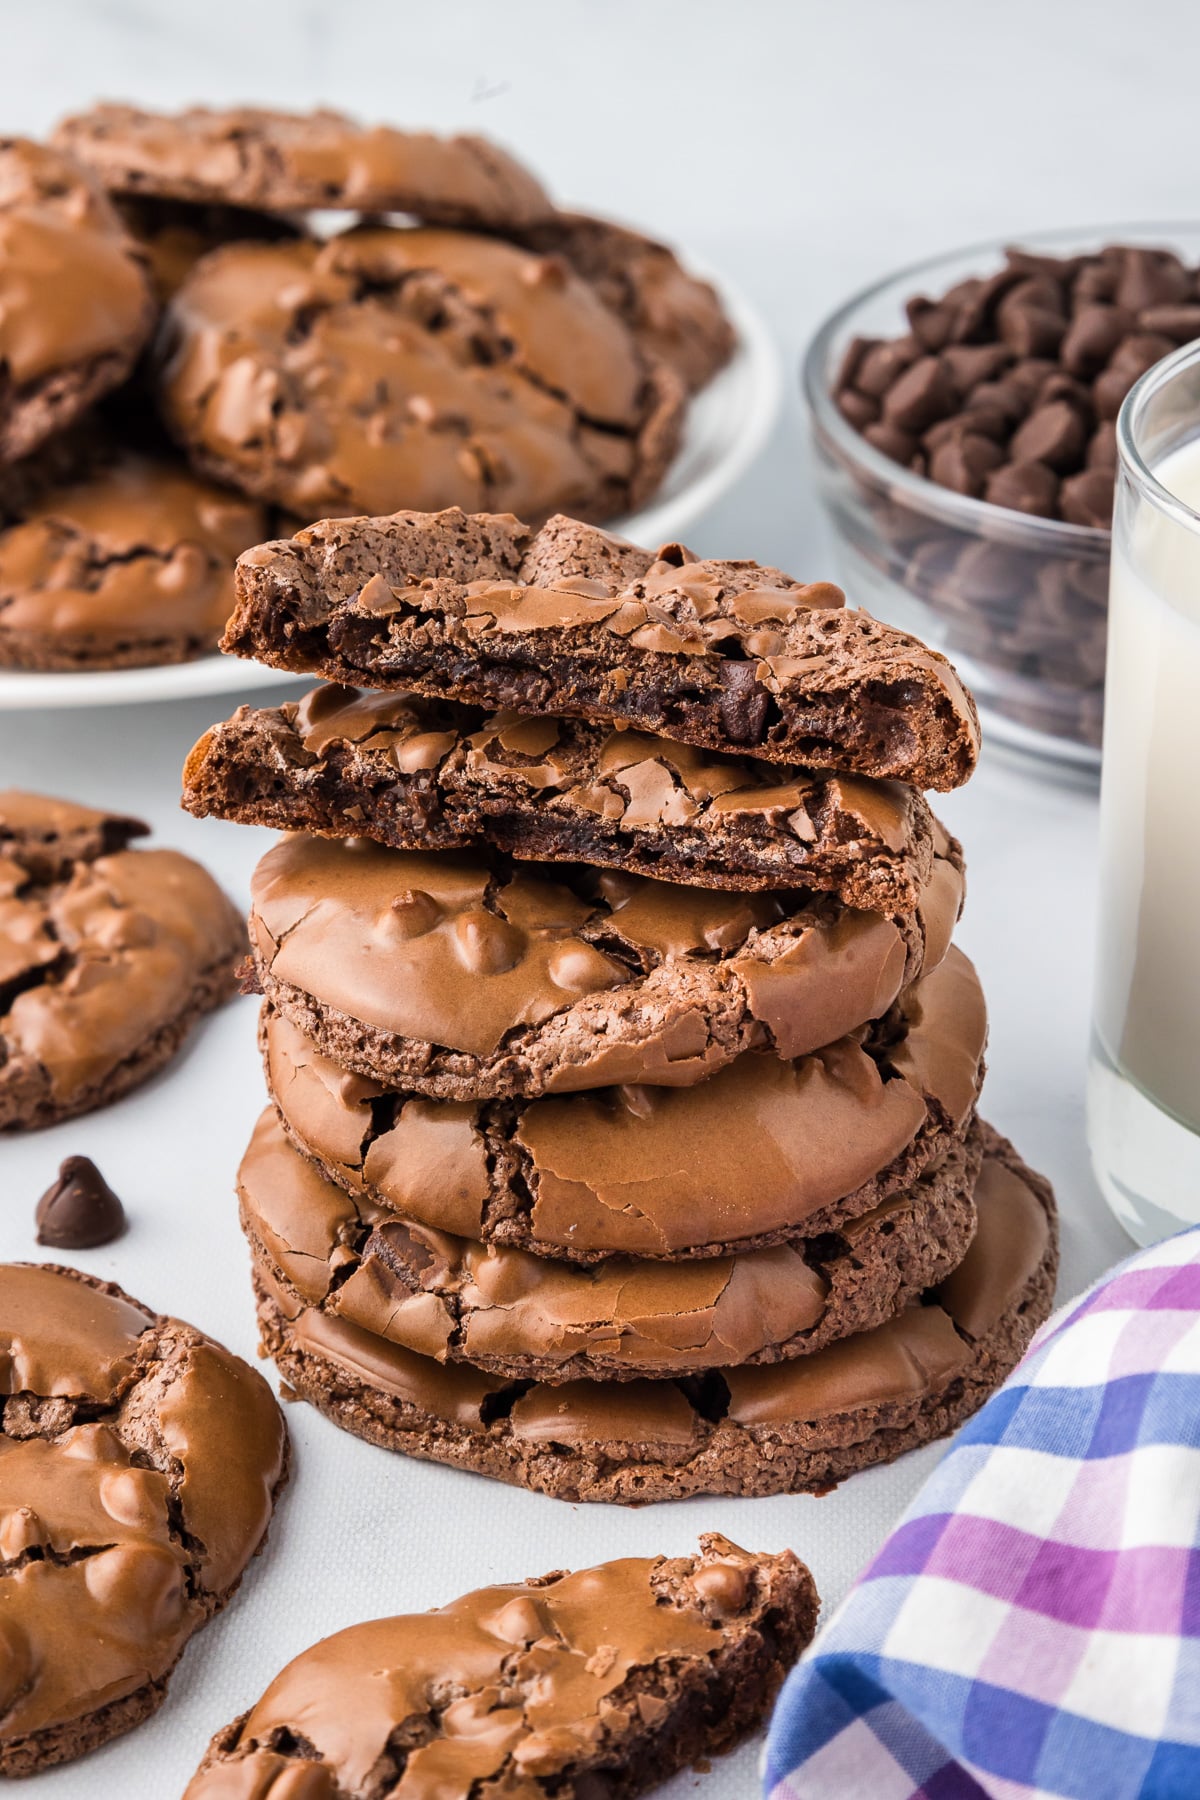 A stack of flourless chocolate brownie cookies with the top cookie cut so you can see the inside, with a glass of milk and more cookies on a plate in the background.